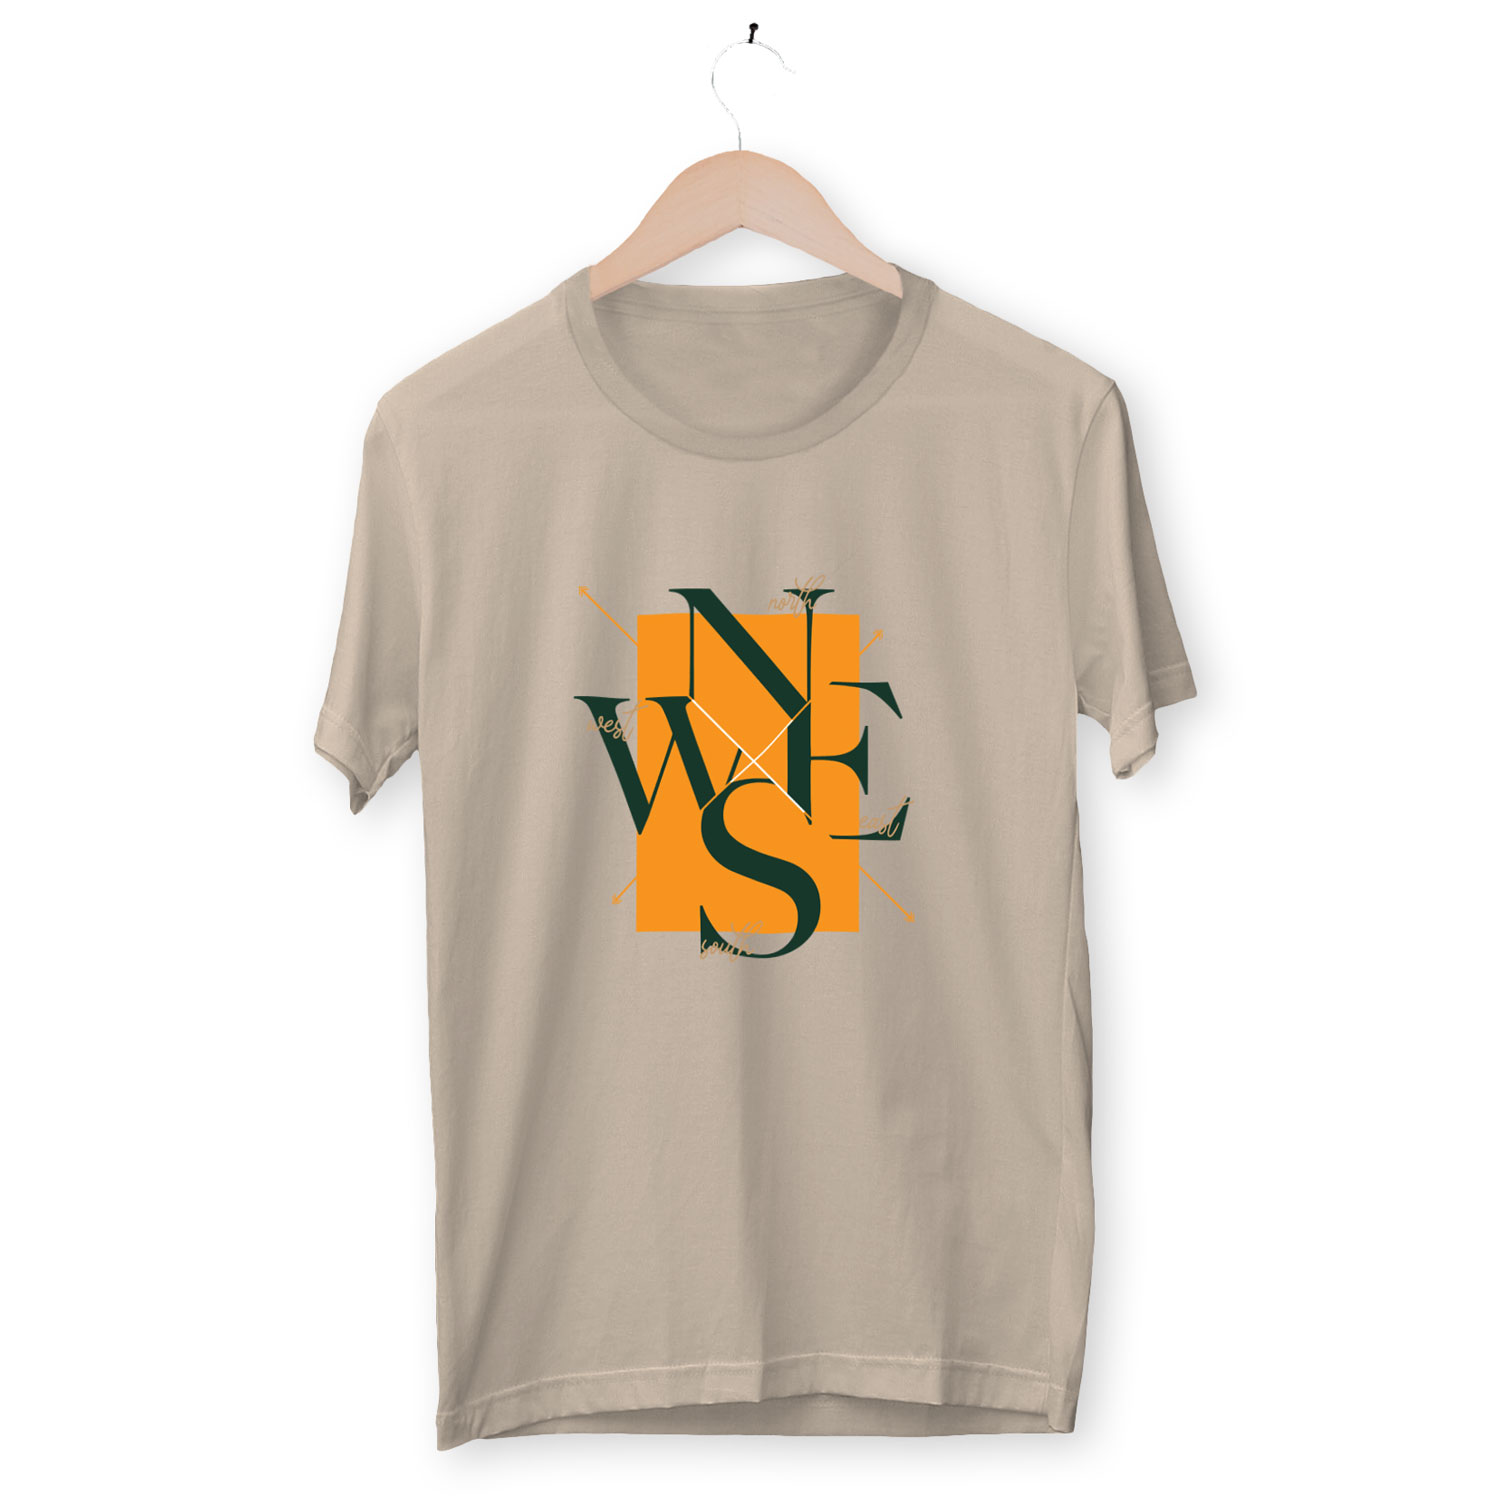 Four Corner Nomad T-shirt (North South East West)